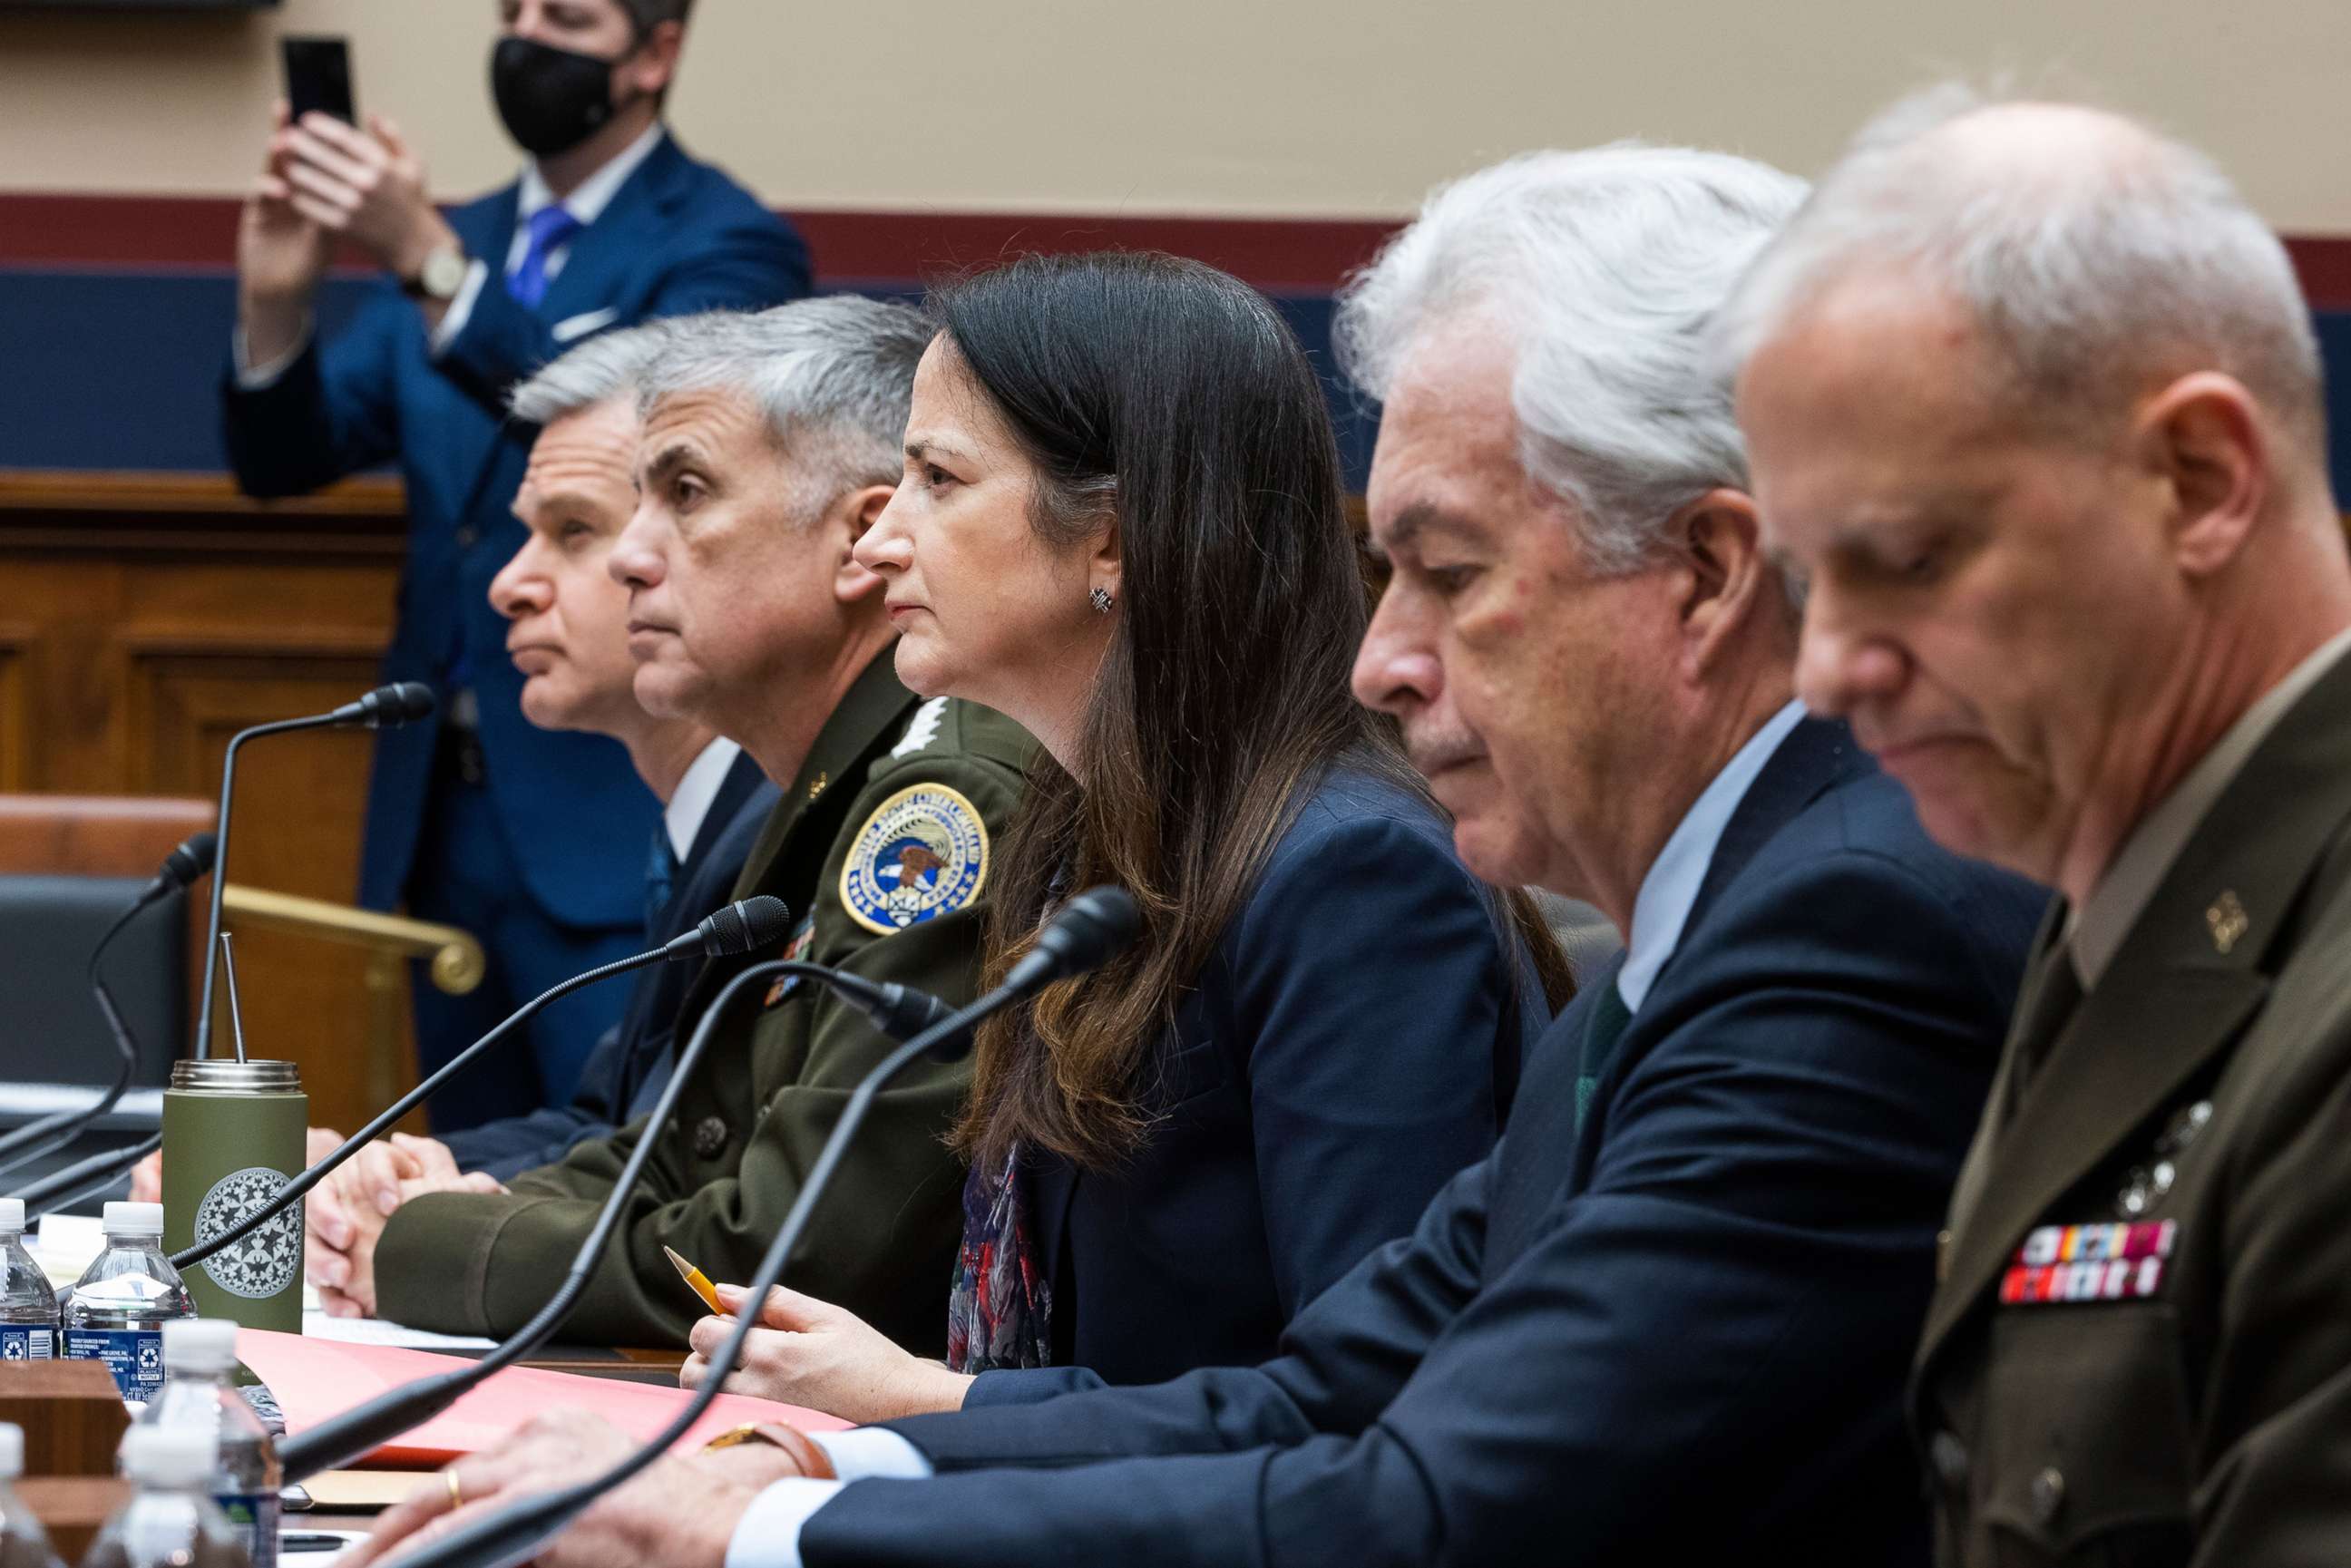 PHOTO: Christopher Wray, General Paul Nakasone, Avril Haines, William Burns and General Scott Berrier, testify before a House Oversight Committee hearing on 'worldwide threats' in the Rayburn House Office Building in Washington, D.C., on March 8, 2022.